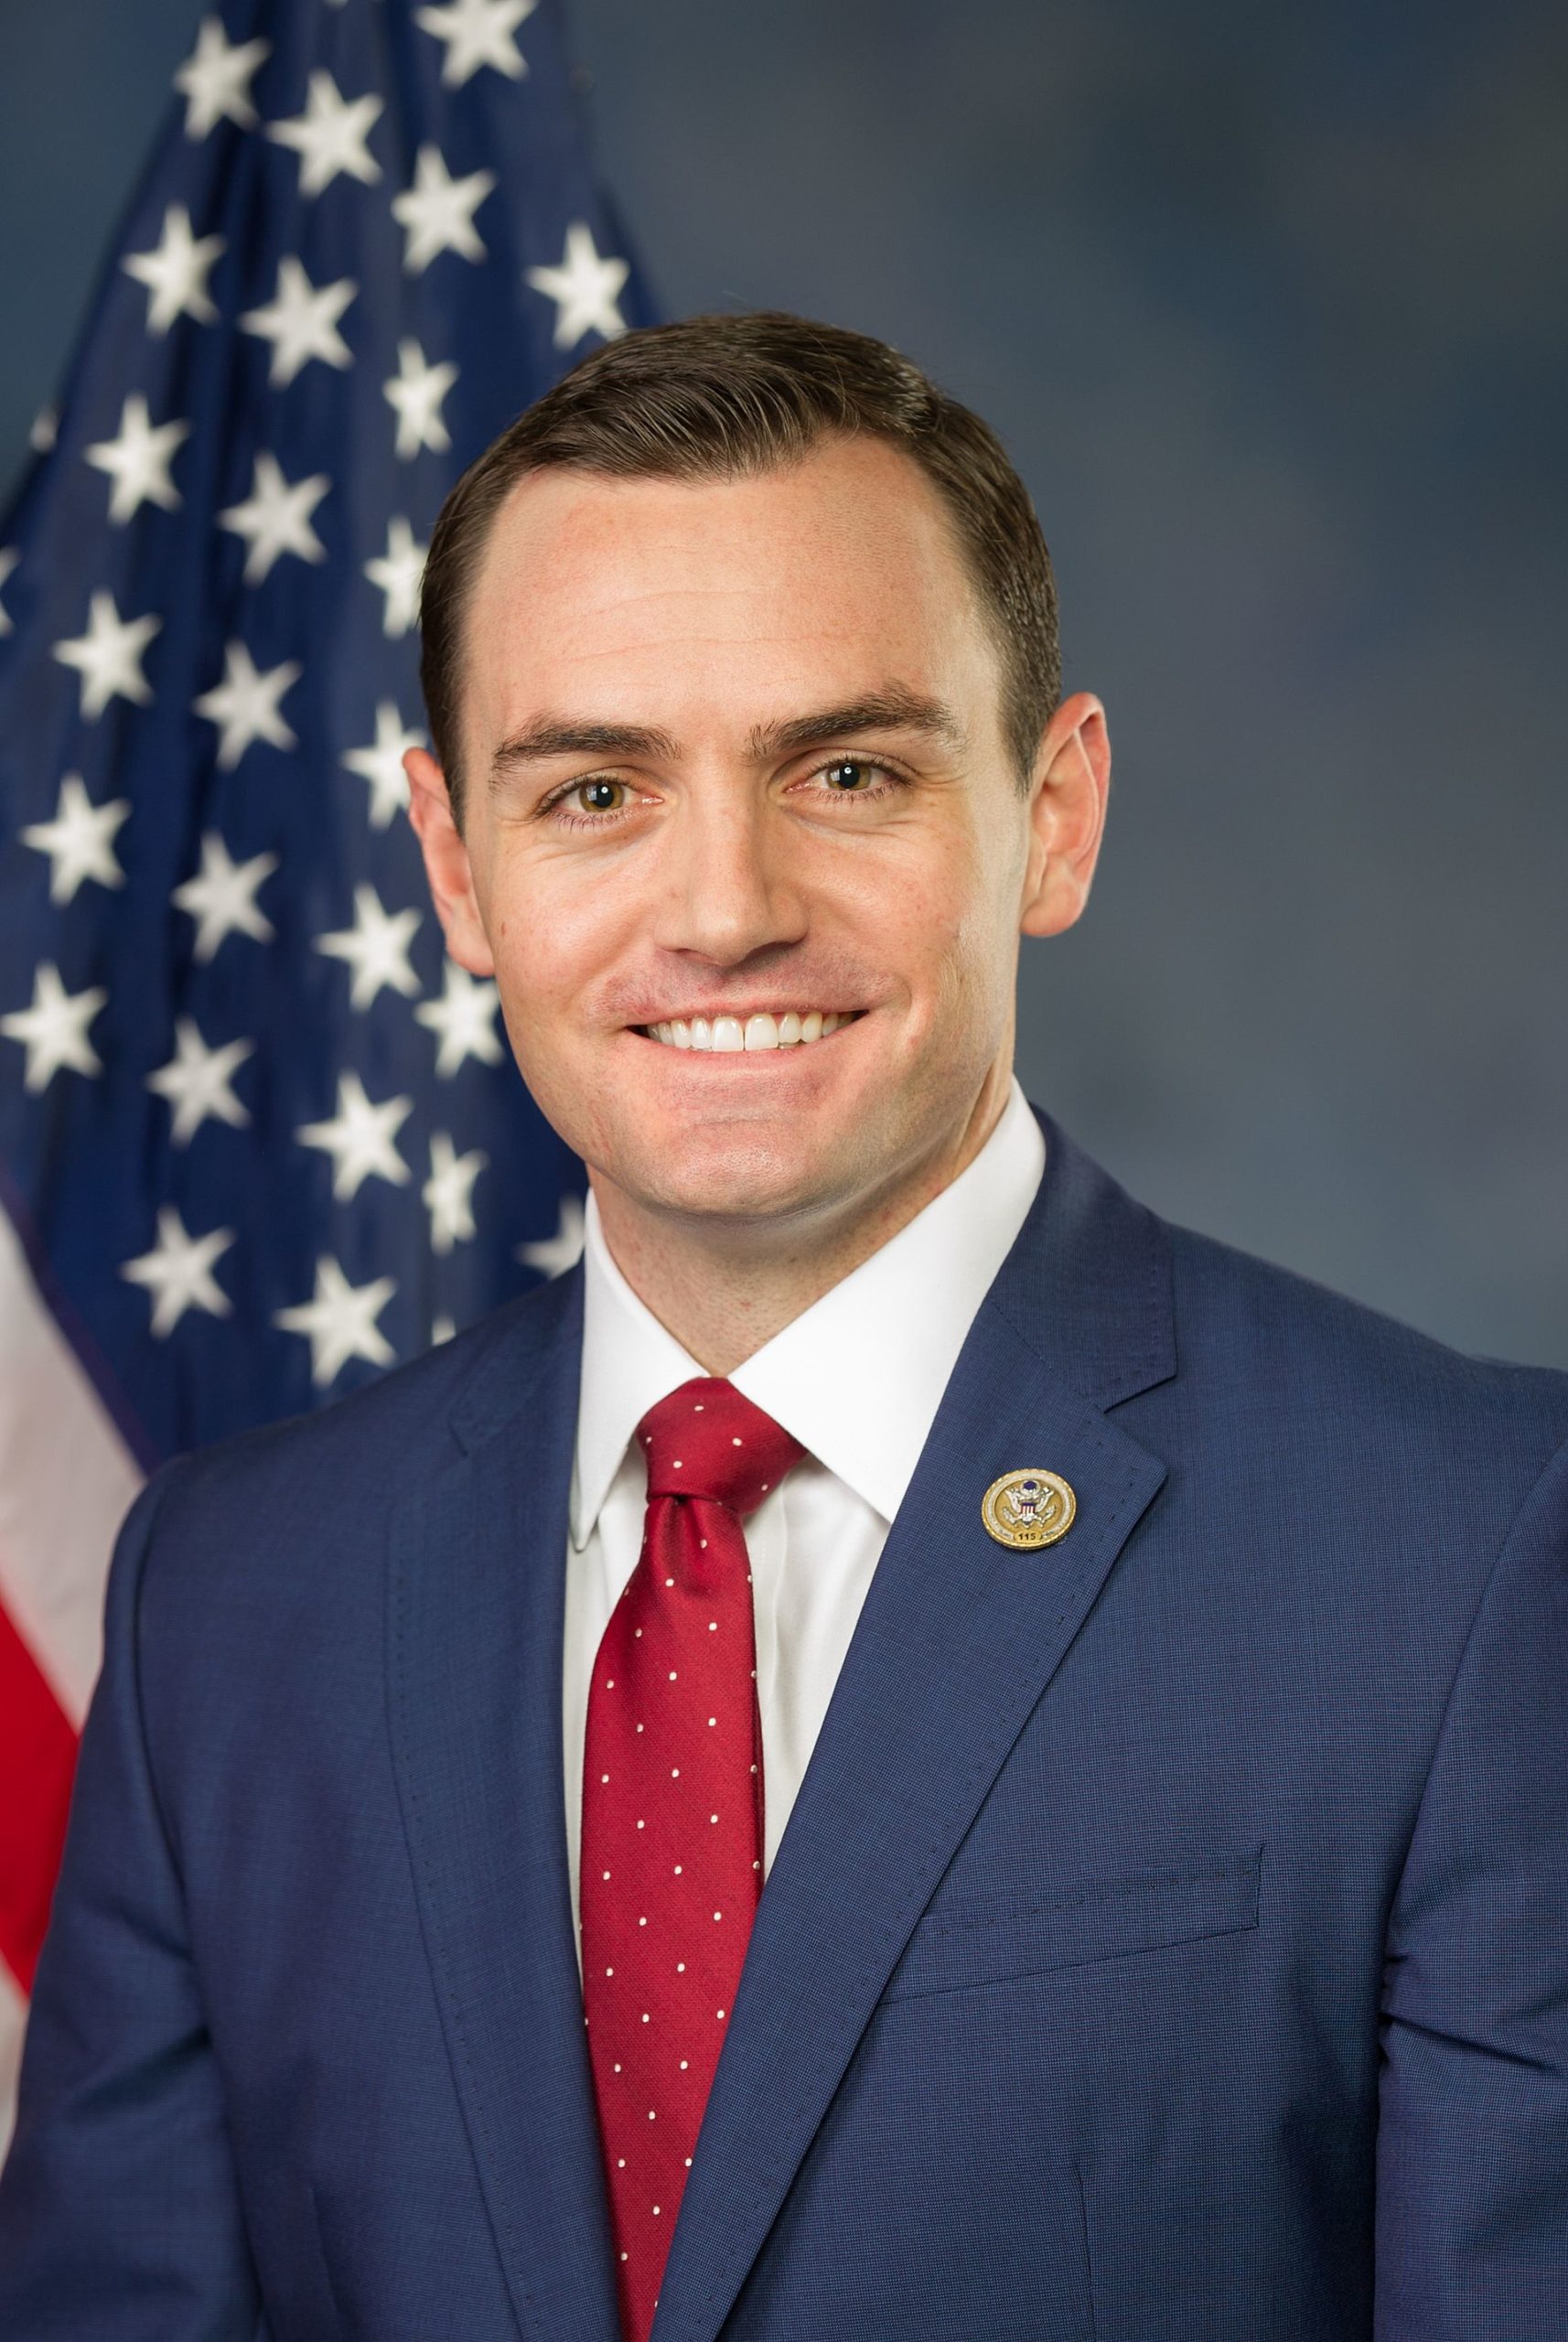 Rep. Mike Gallagher Republican Accountability Project